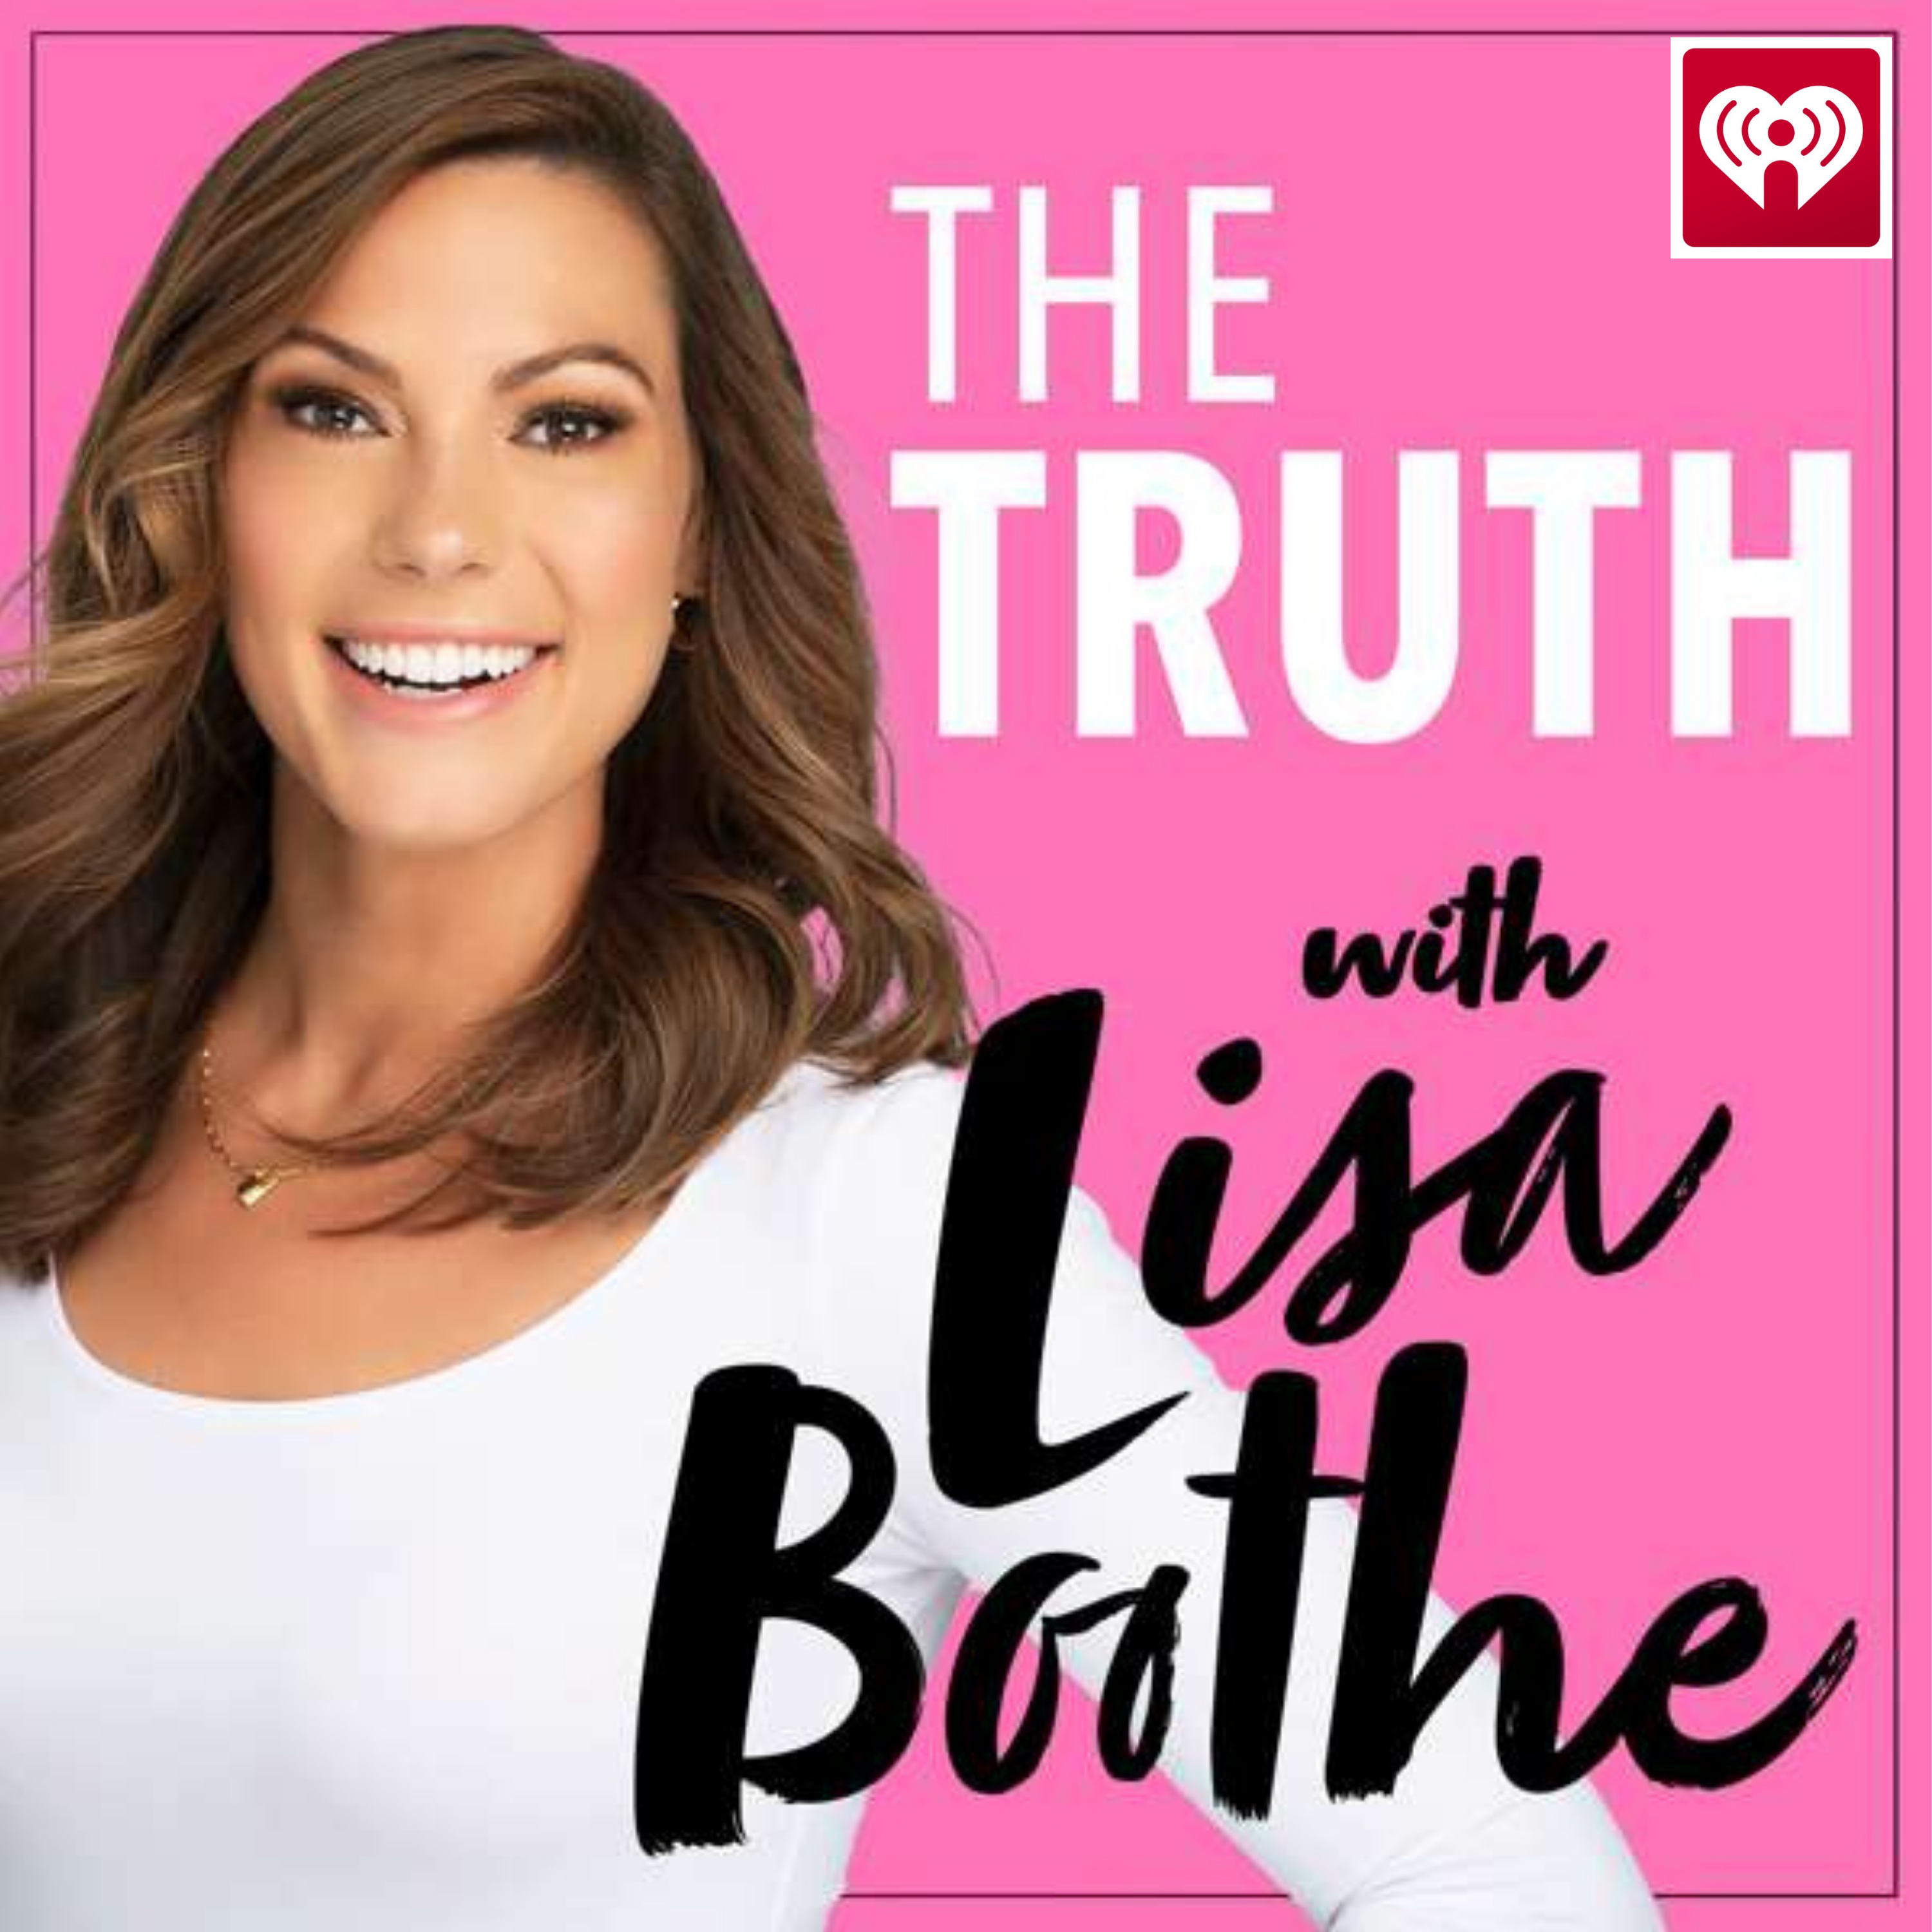 The Truth with Lisa Boothe: Oklahoma's Opposition to Biden's Changes to Title IX